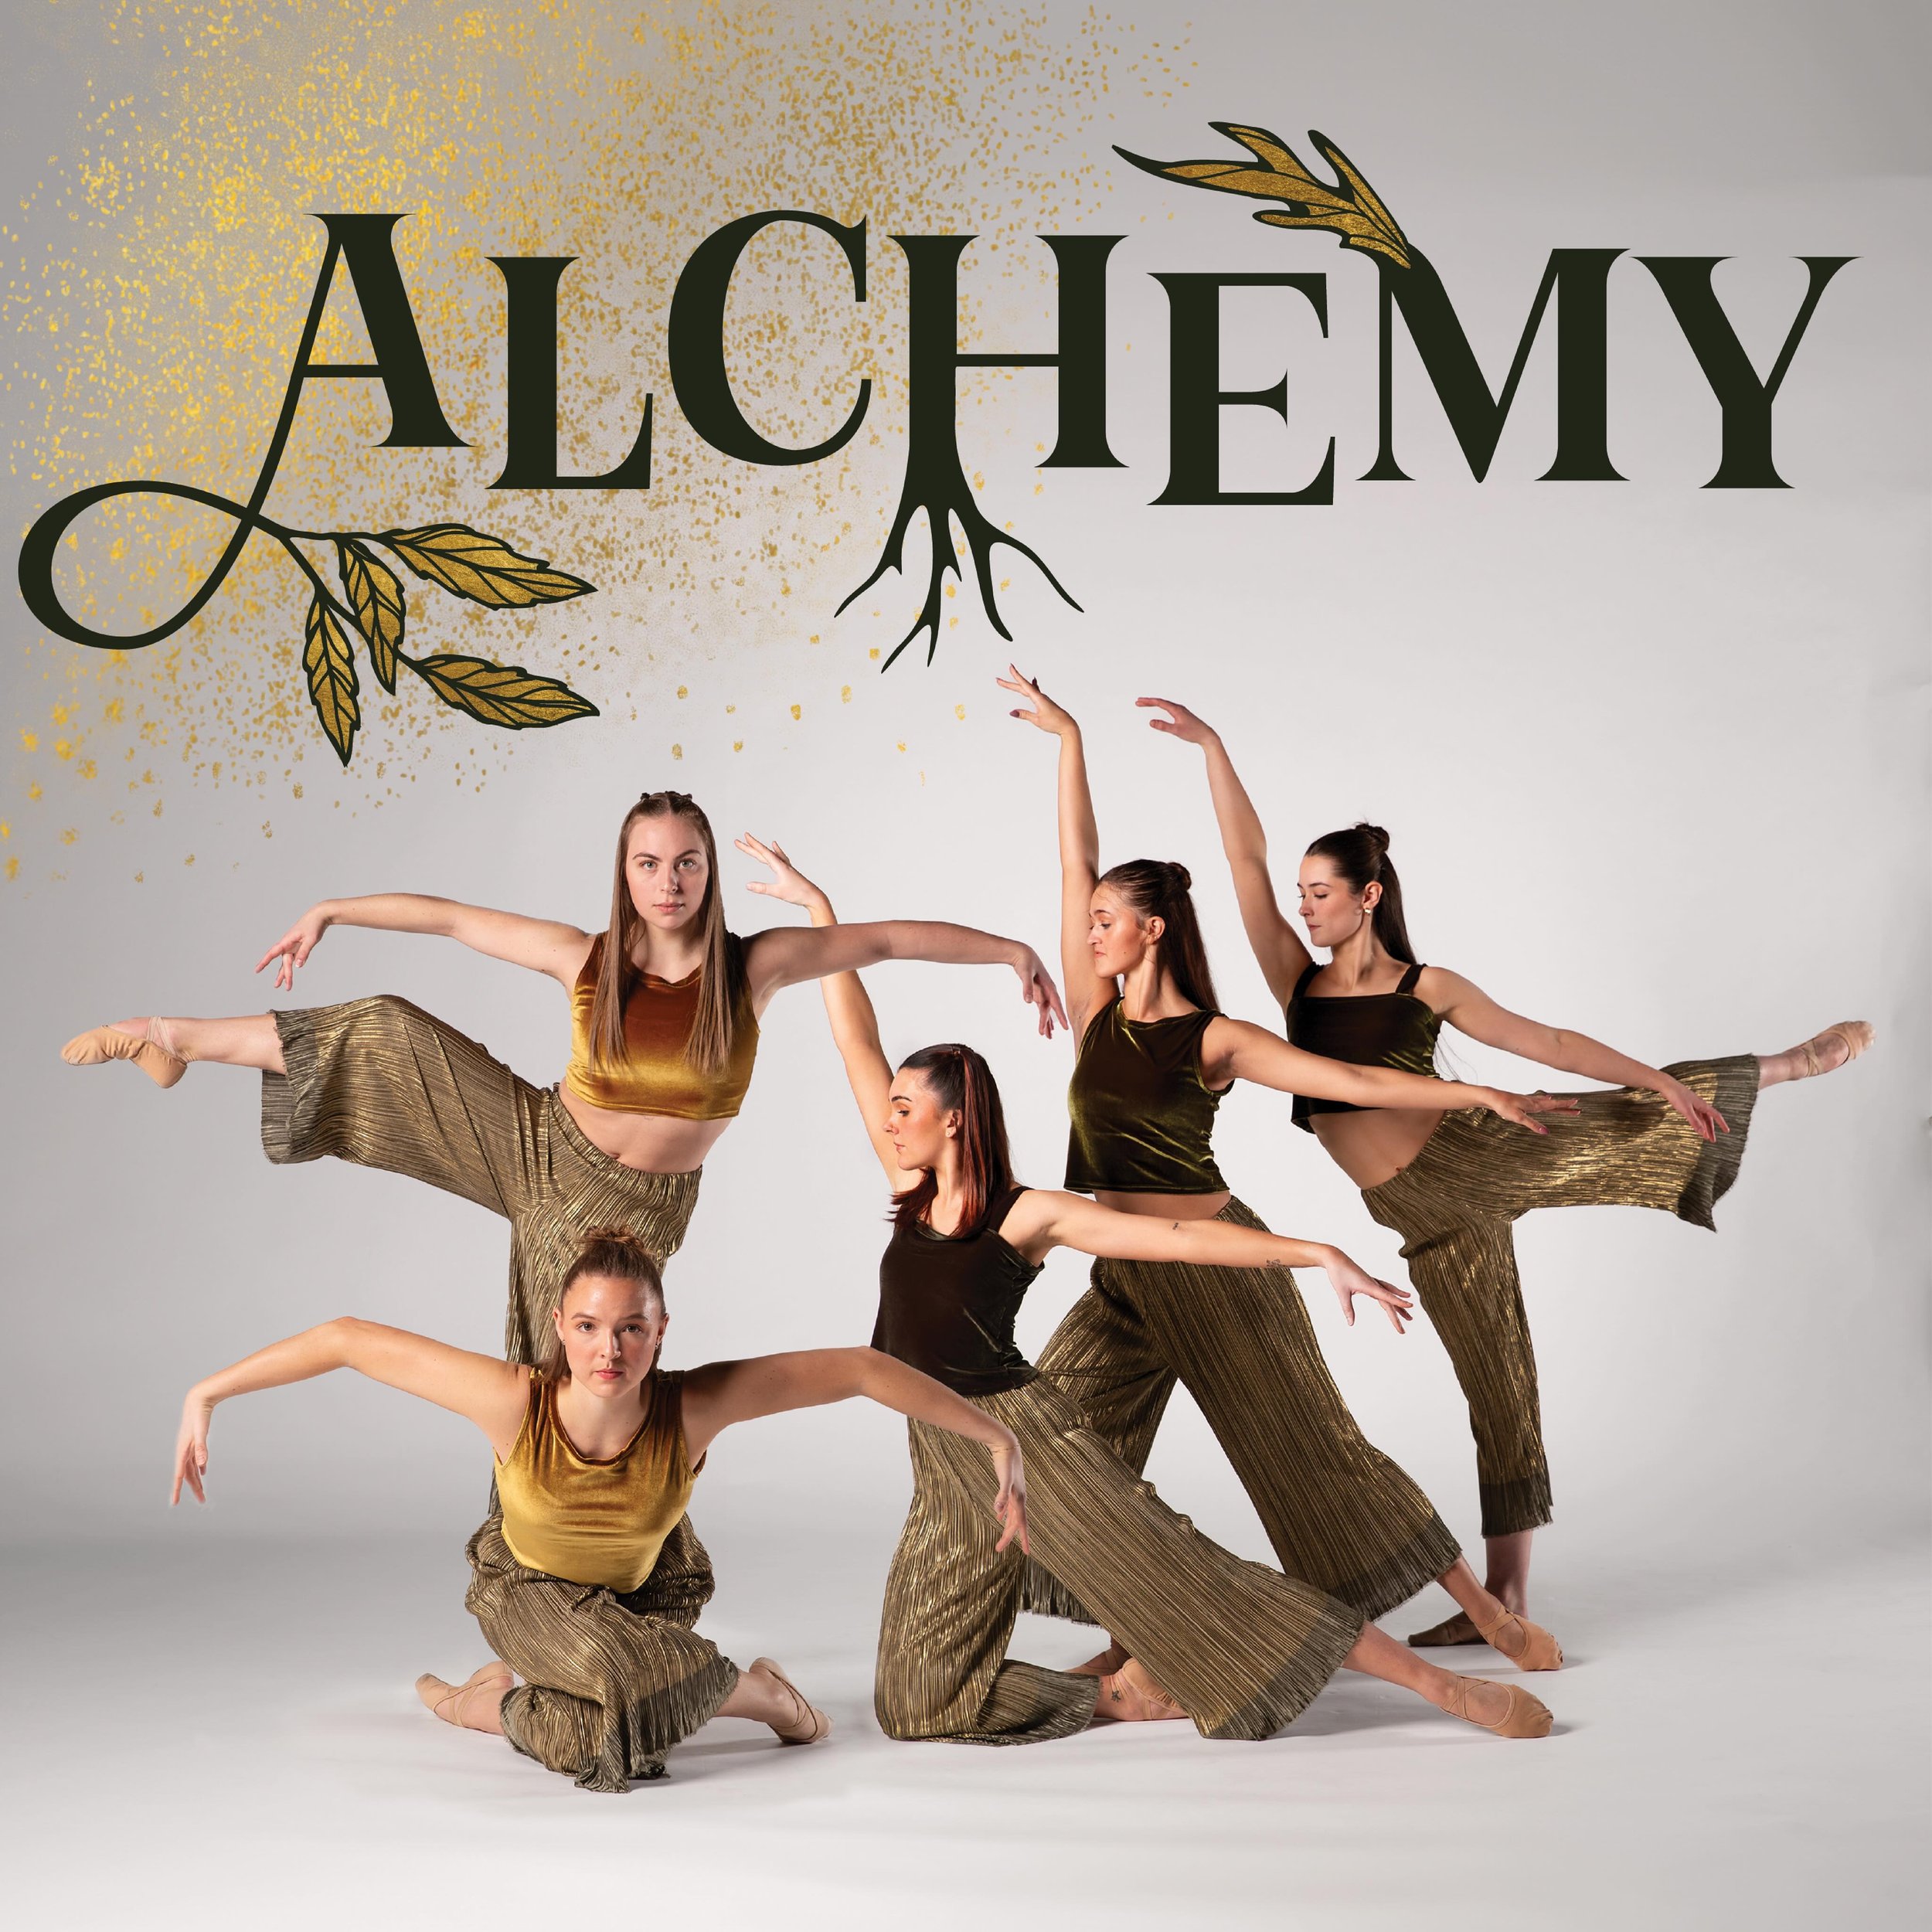 The University of Utah&rsquo;s School of Dance presents a transformative evening with Alchemy. 

In celebration of the 75th anniversary of the College of Fine Arts, we pay tribute to the past and celebrate the present by honoring our connections to l